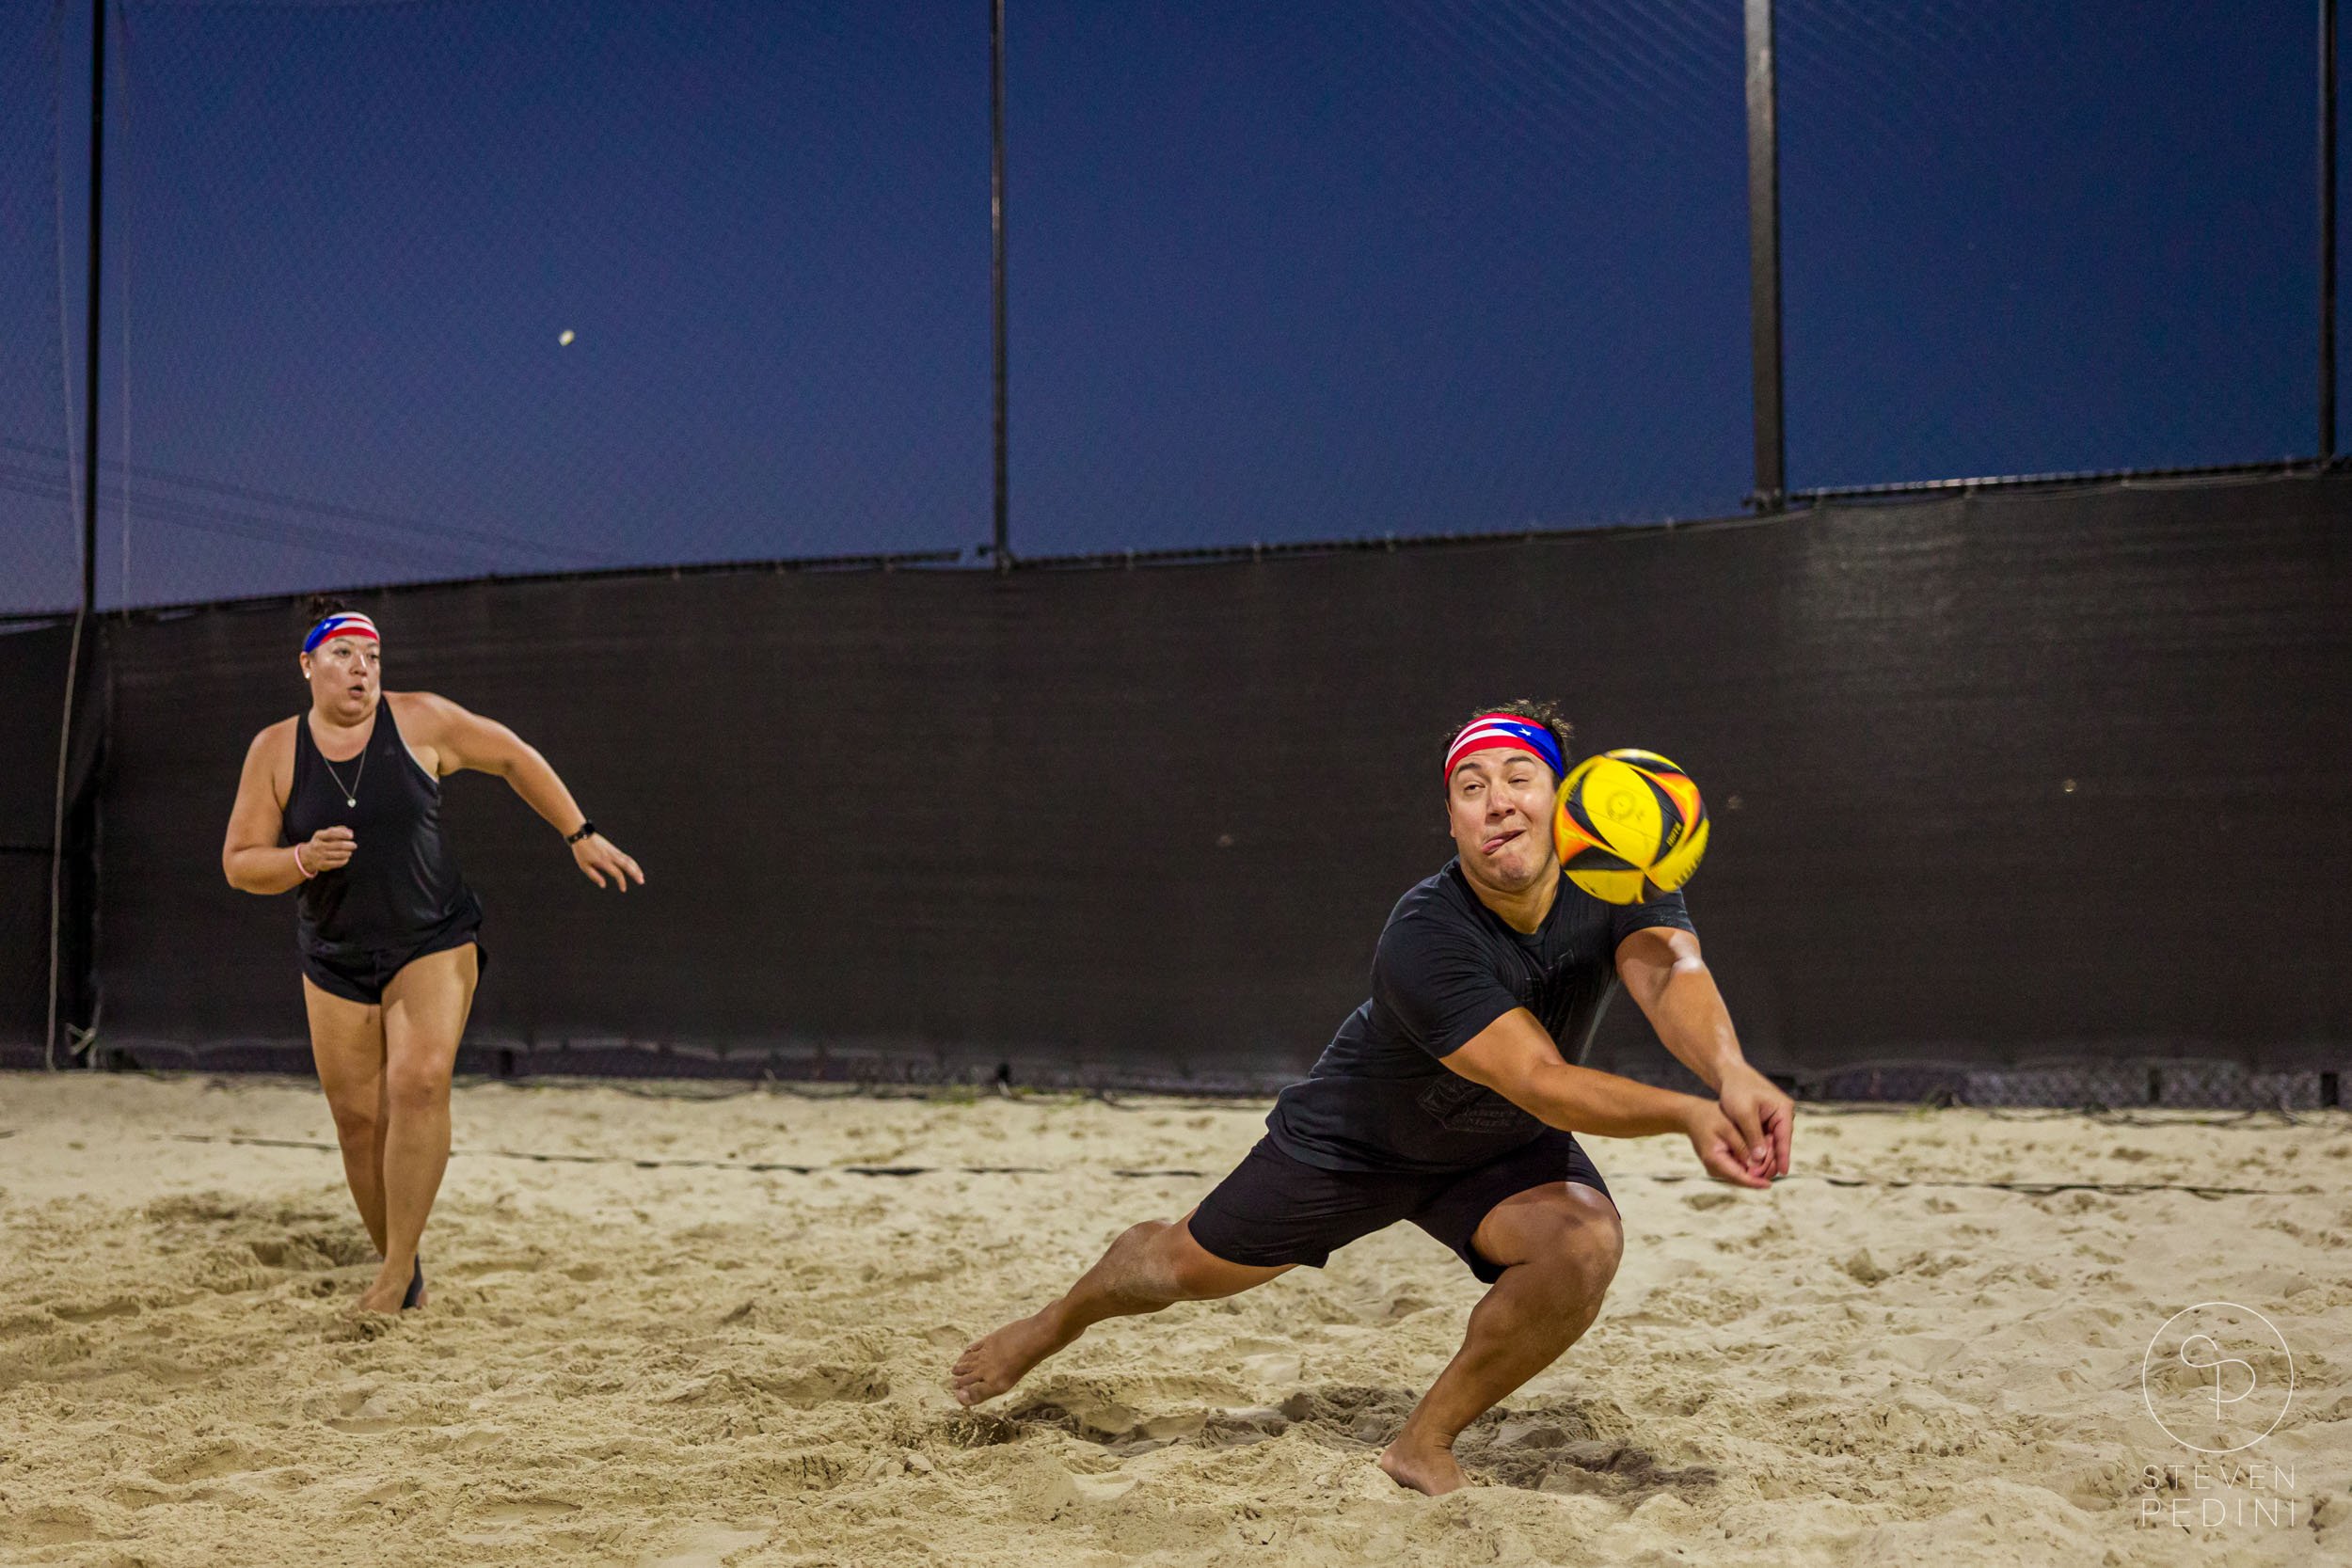 Steven Pedini Photography - Bumpy Pickle - Sand Volleyball - Houston TX - World Cup of Volleyball - 00314.jpg